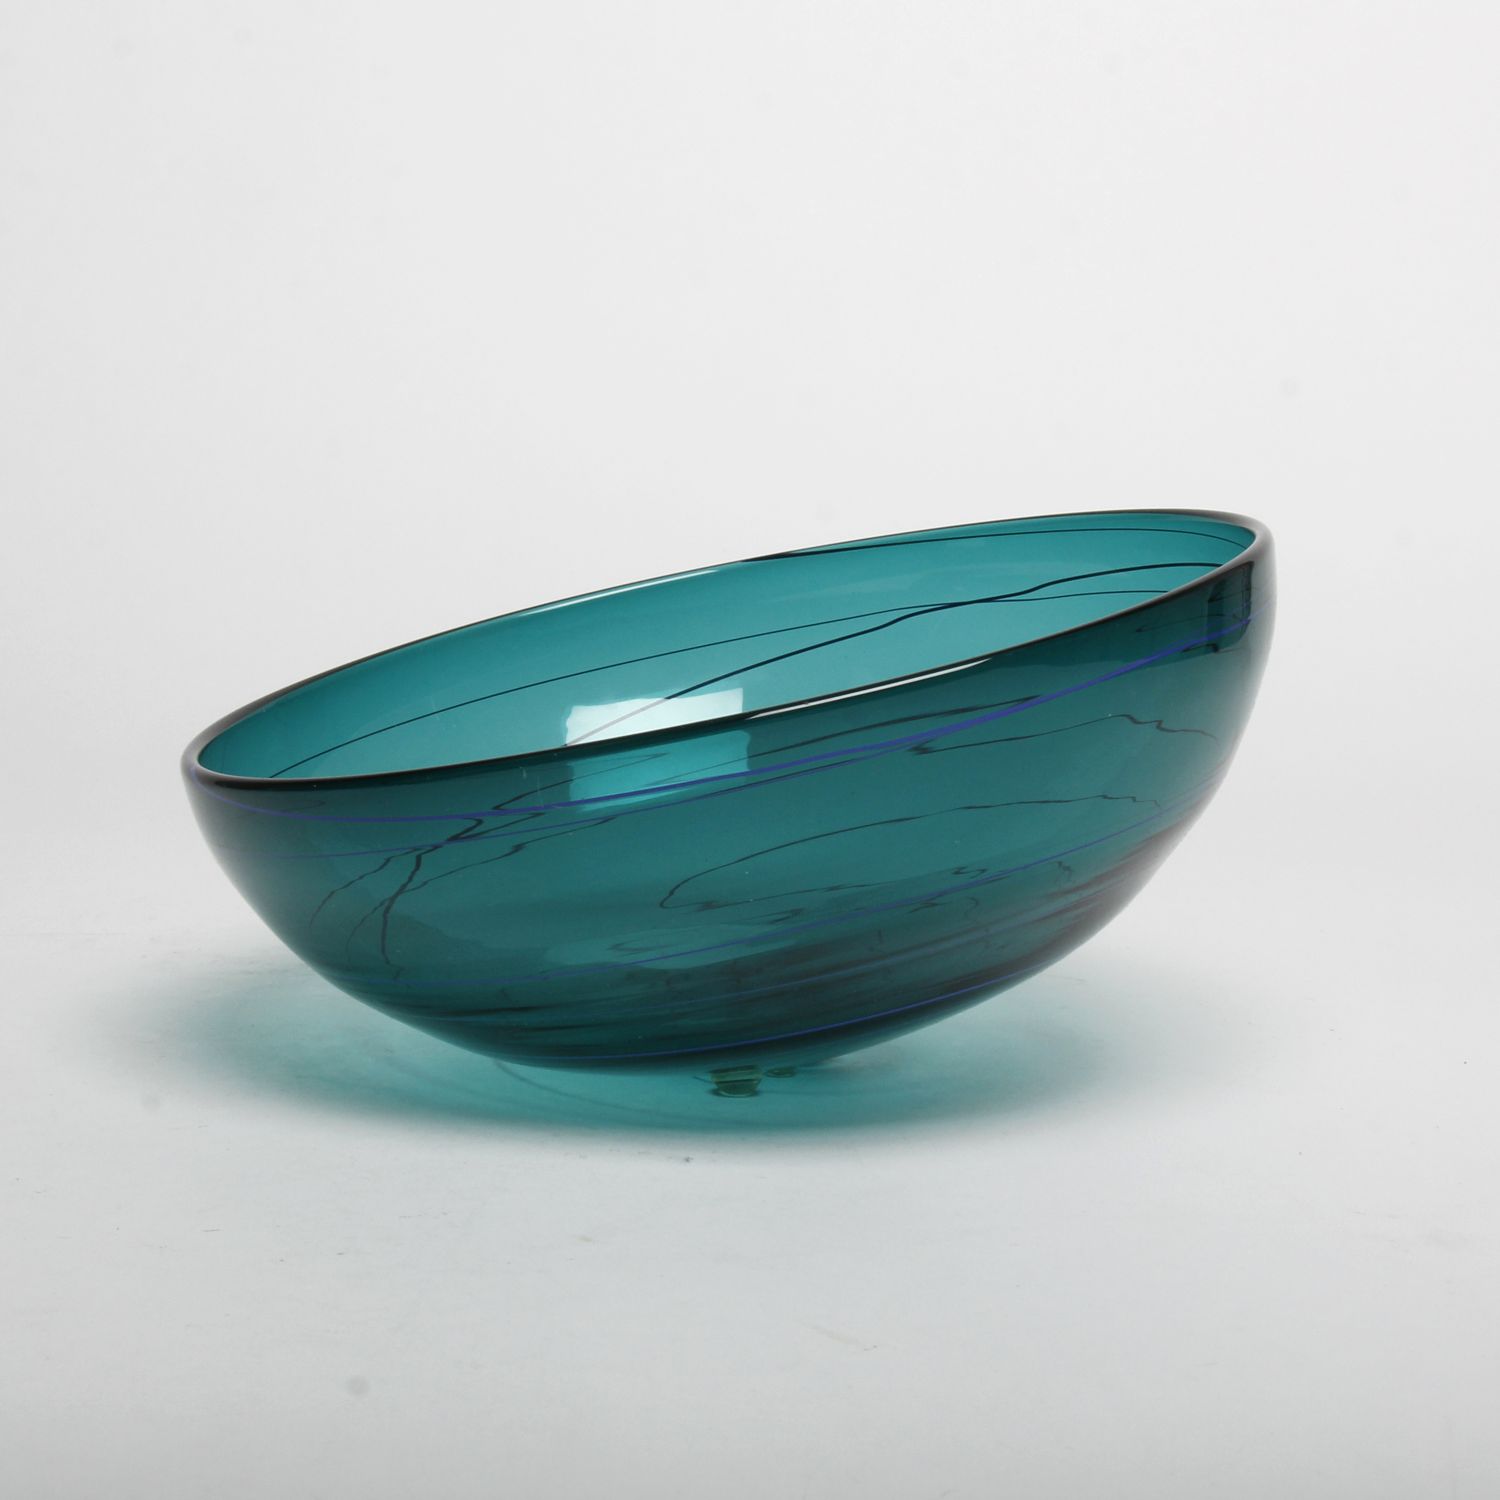 Eidos Glass Designs: Bowl (Each sold separately) Product Image 5 of 5